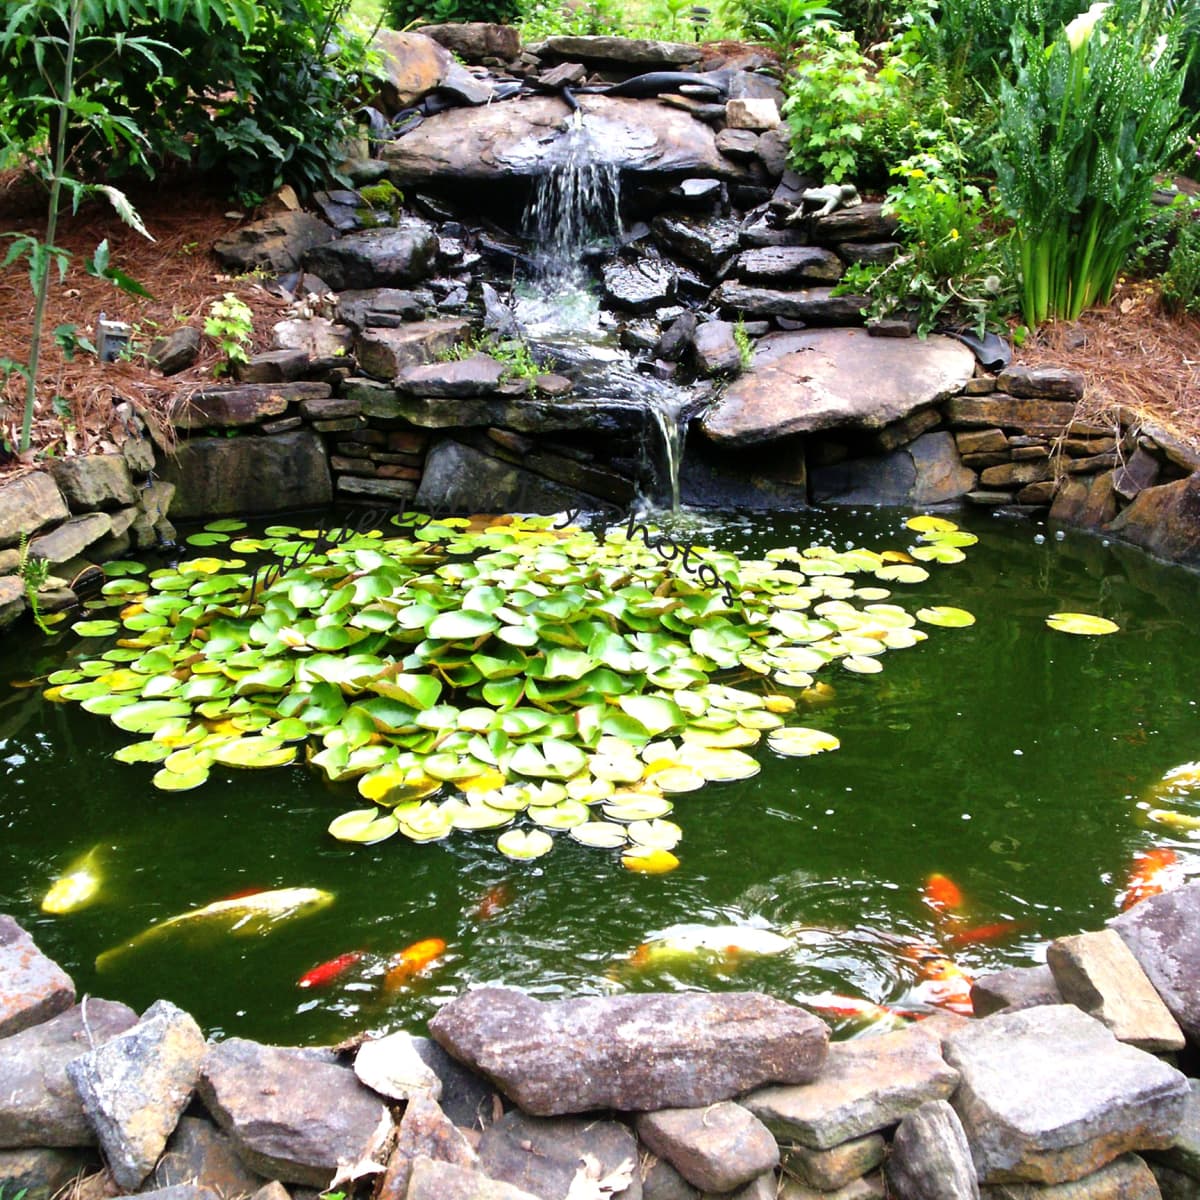 How To Make A Beautiful Goldfish Pond, How To Build Your Own Garden Fish Pond